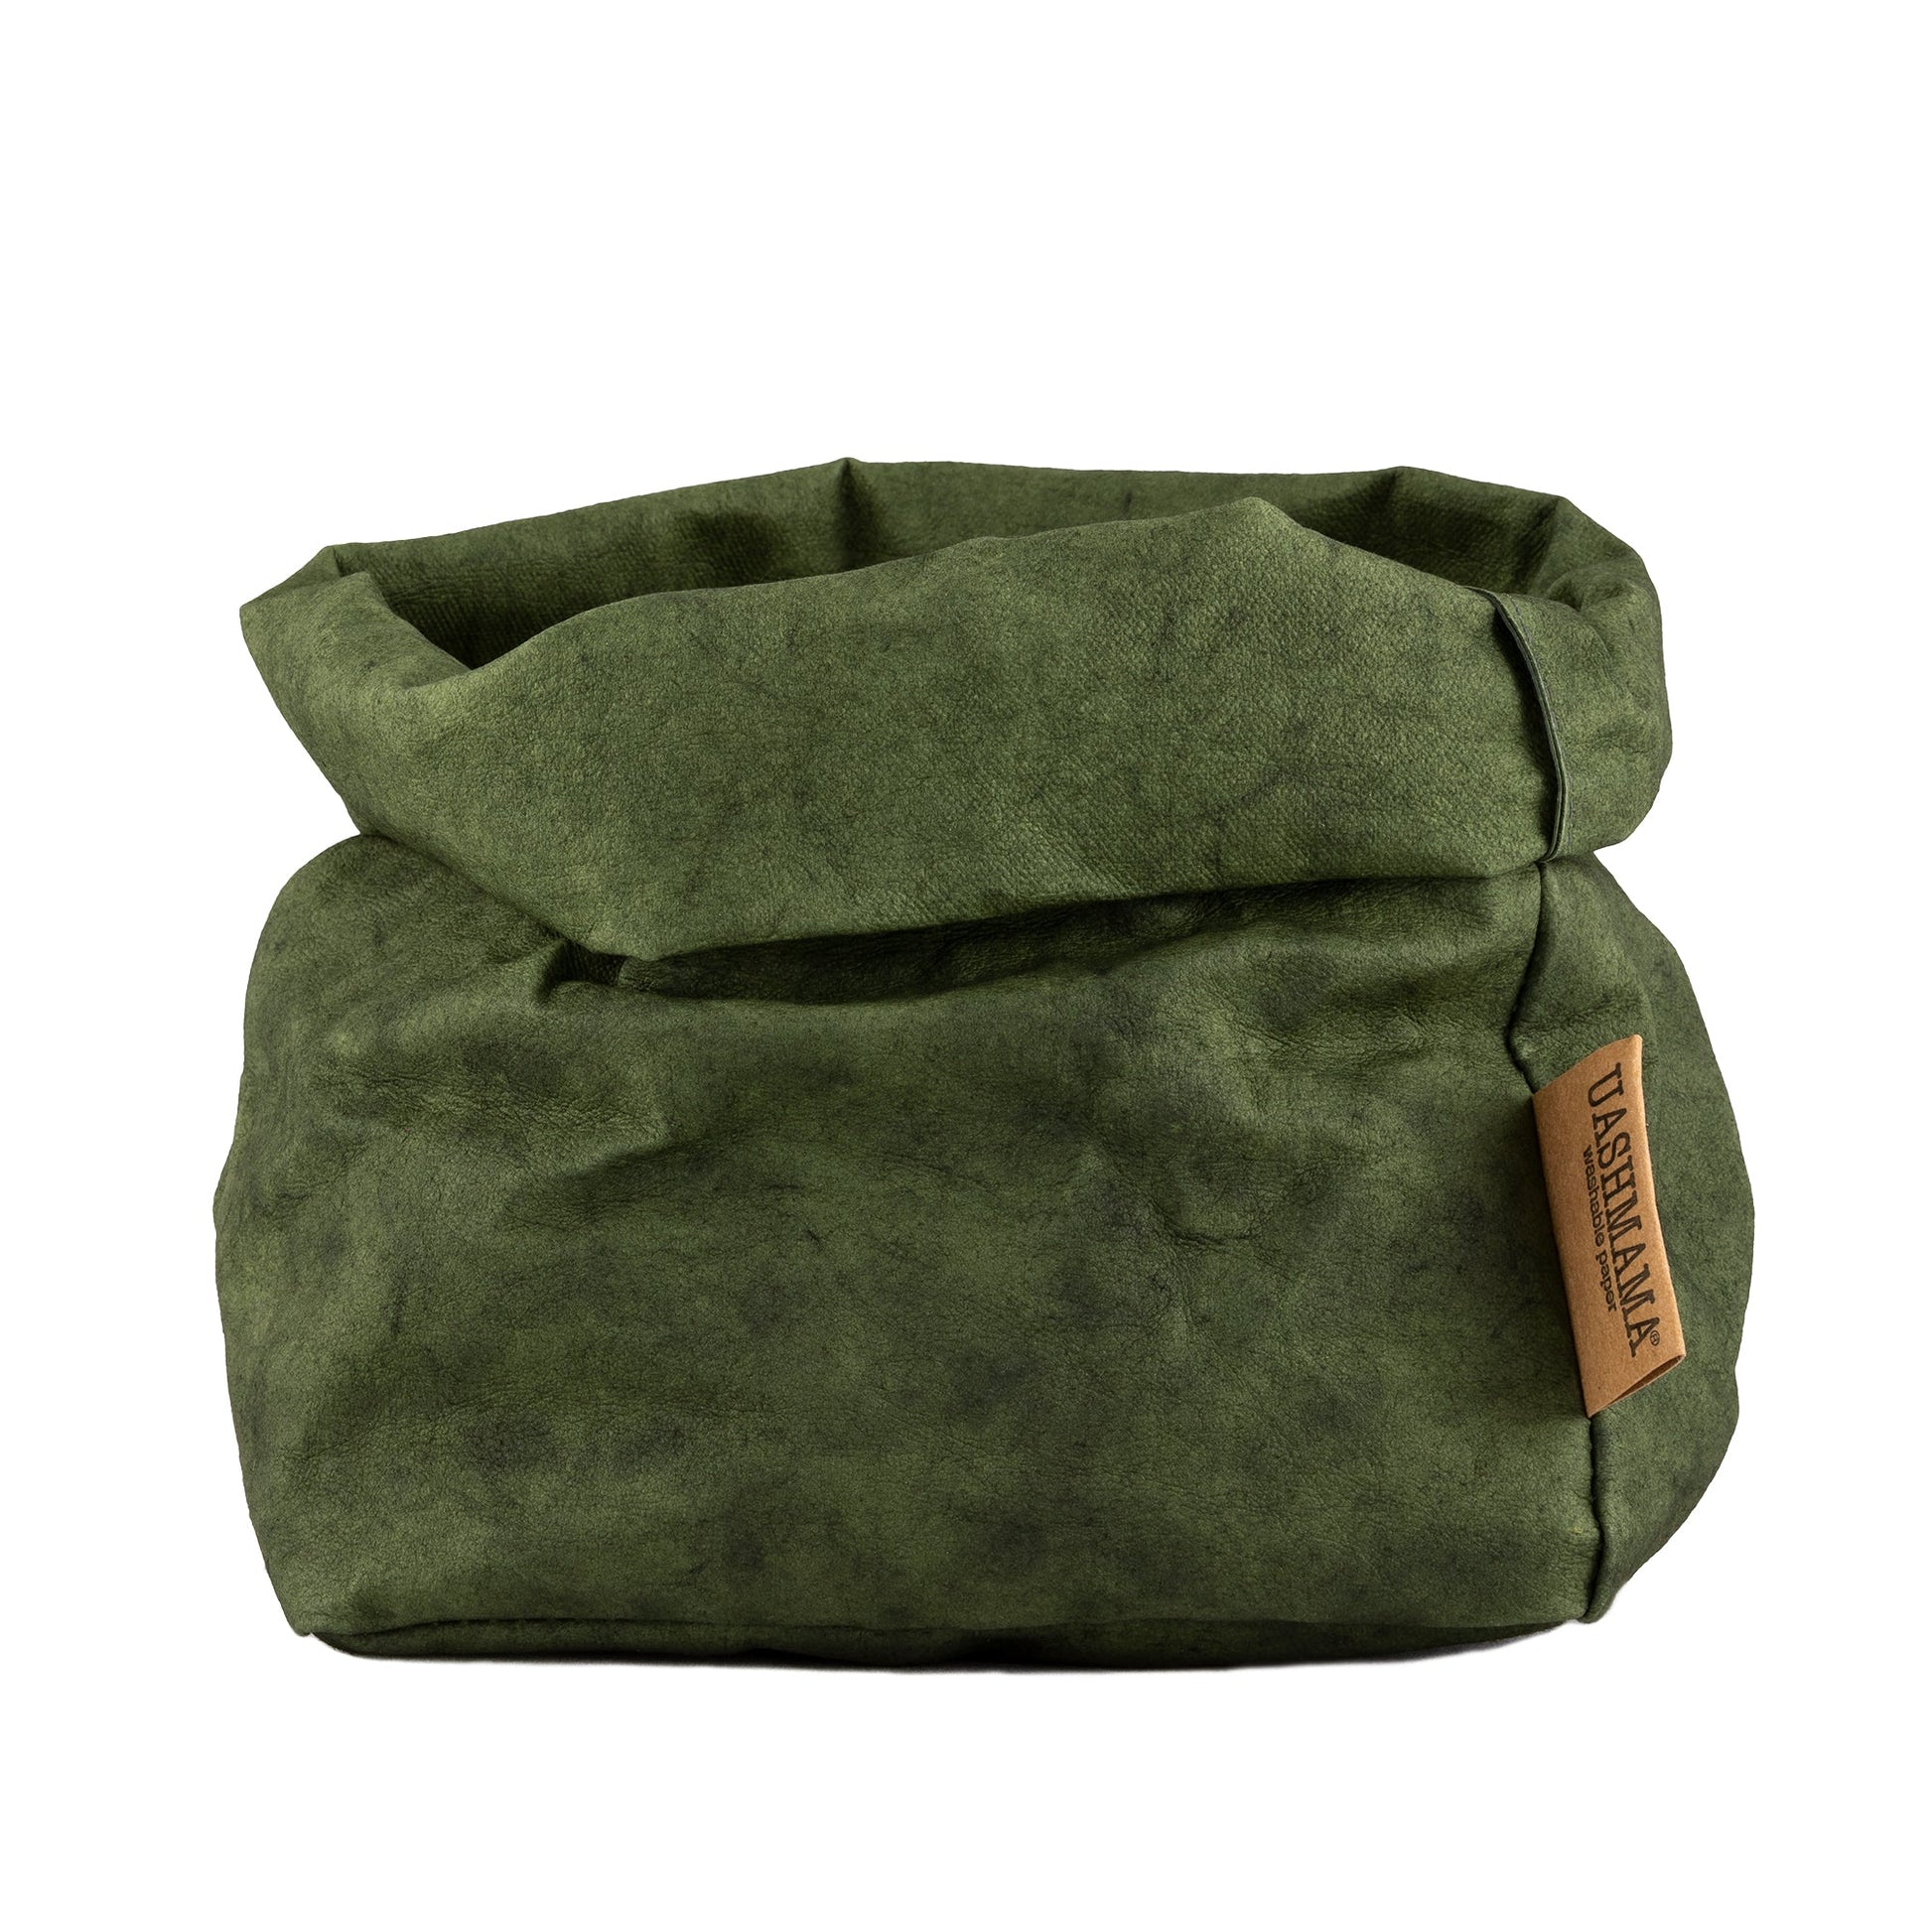 A washable paper bag is shown. The bag is rolled down at the top and features a UASHMAMA logo label on the bottom left corner. The bag pictured is the medium size in dark green.